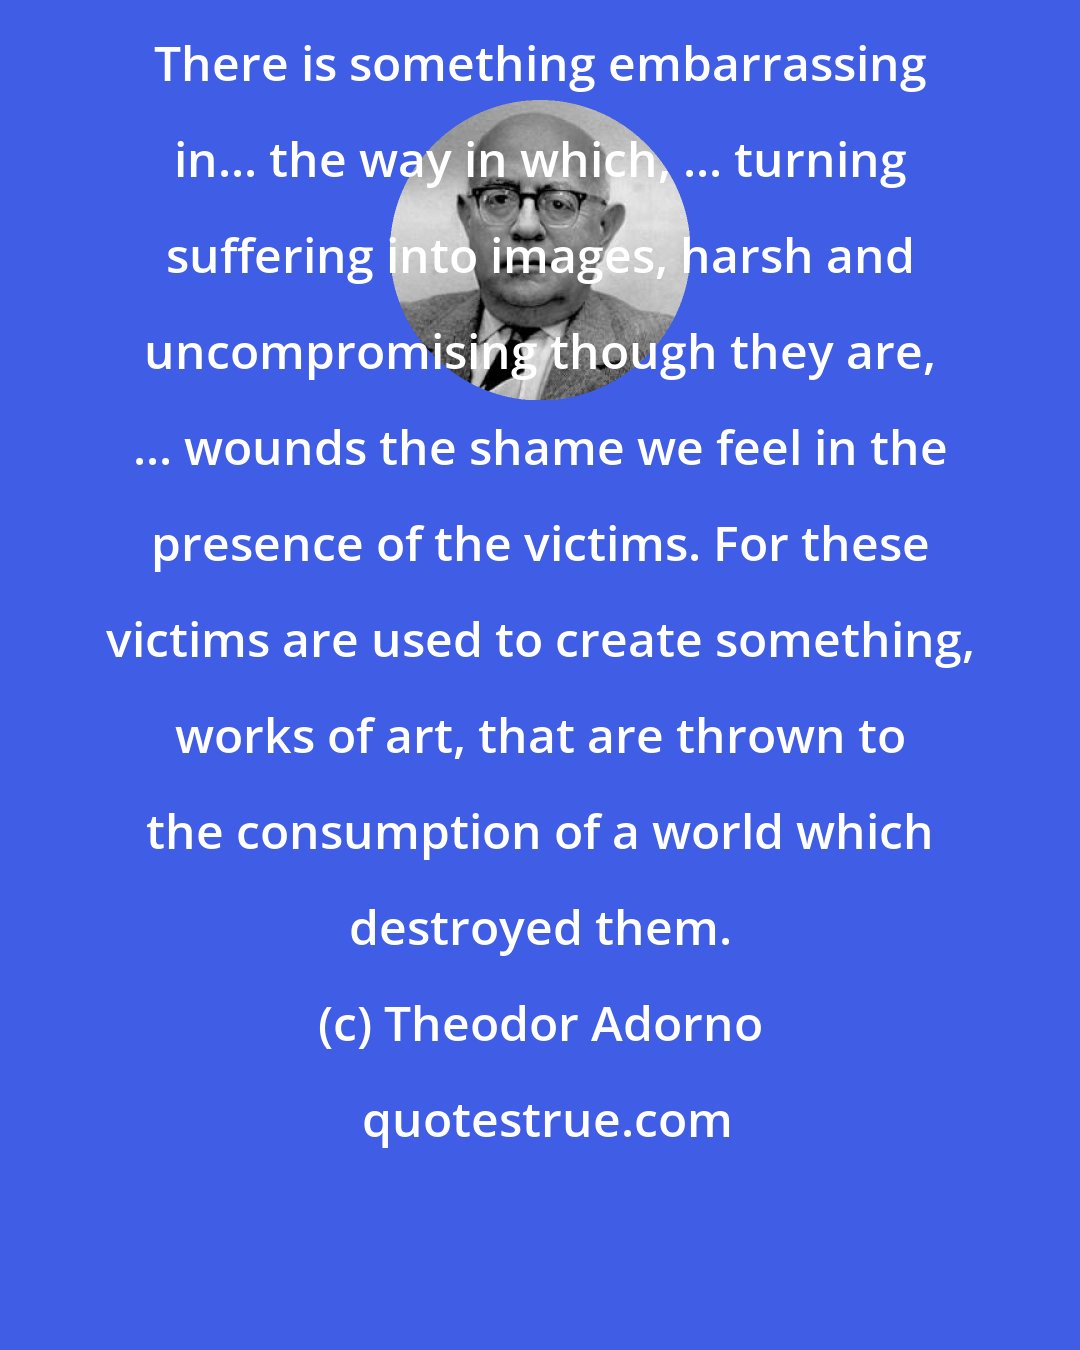 Theodor Adorno: There is something embarrassing in... the way in which, ... turning suffering into images, harsh and uncompromising though they are, ... wounds the shame we feel in the presence of the victims. For these victims are used to create something, works of art, that are thrown to the consumption of a world which destroyed them.